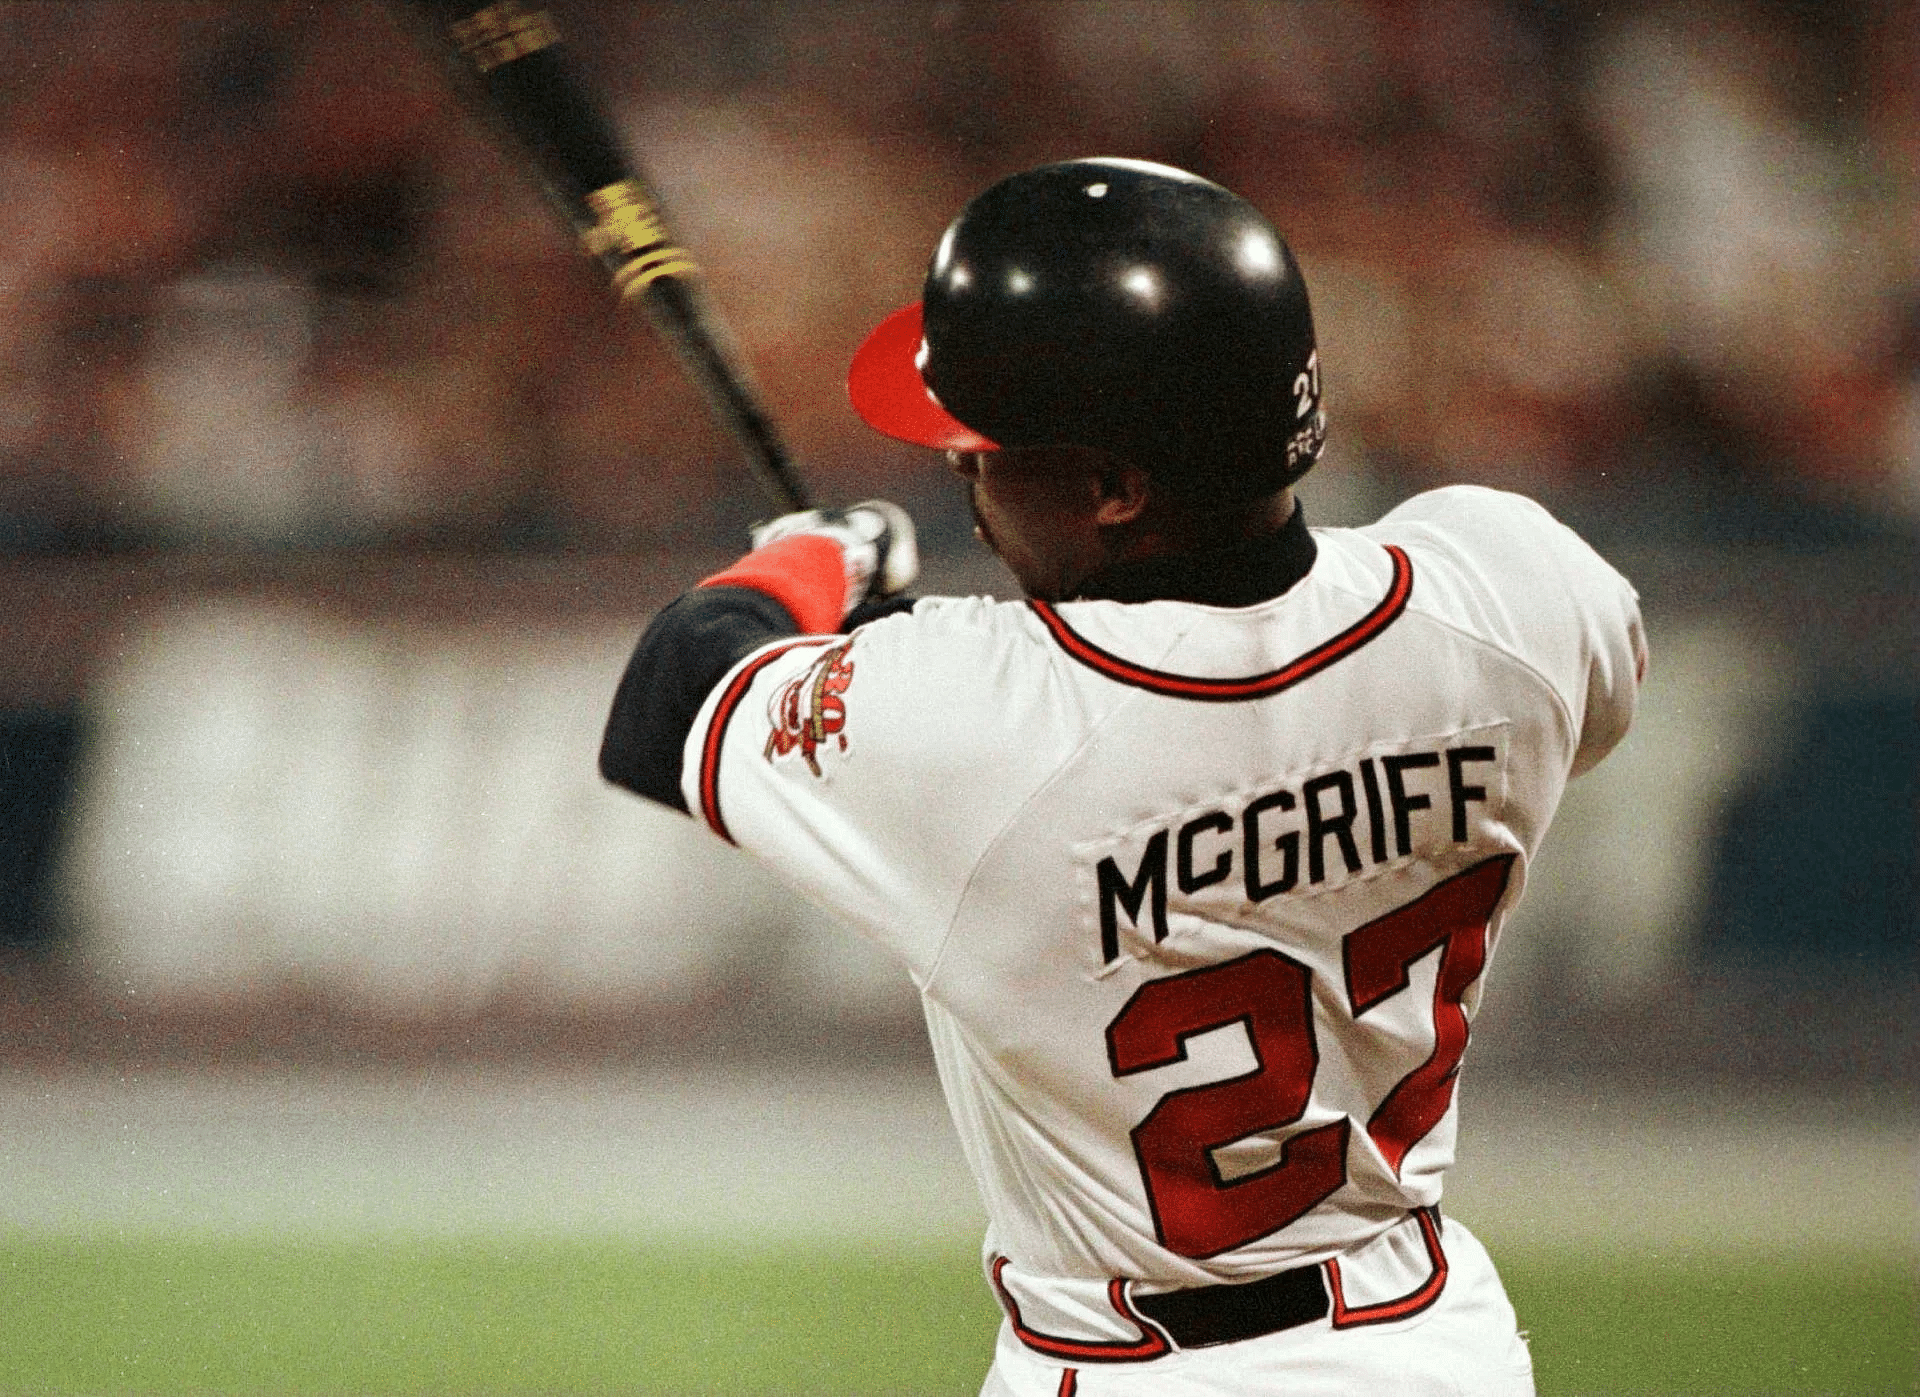 Fred McGriff is headed to Cooperstown! He's been elected to the  @baseballhall by the Contemporary Baseball Era Players Committee.